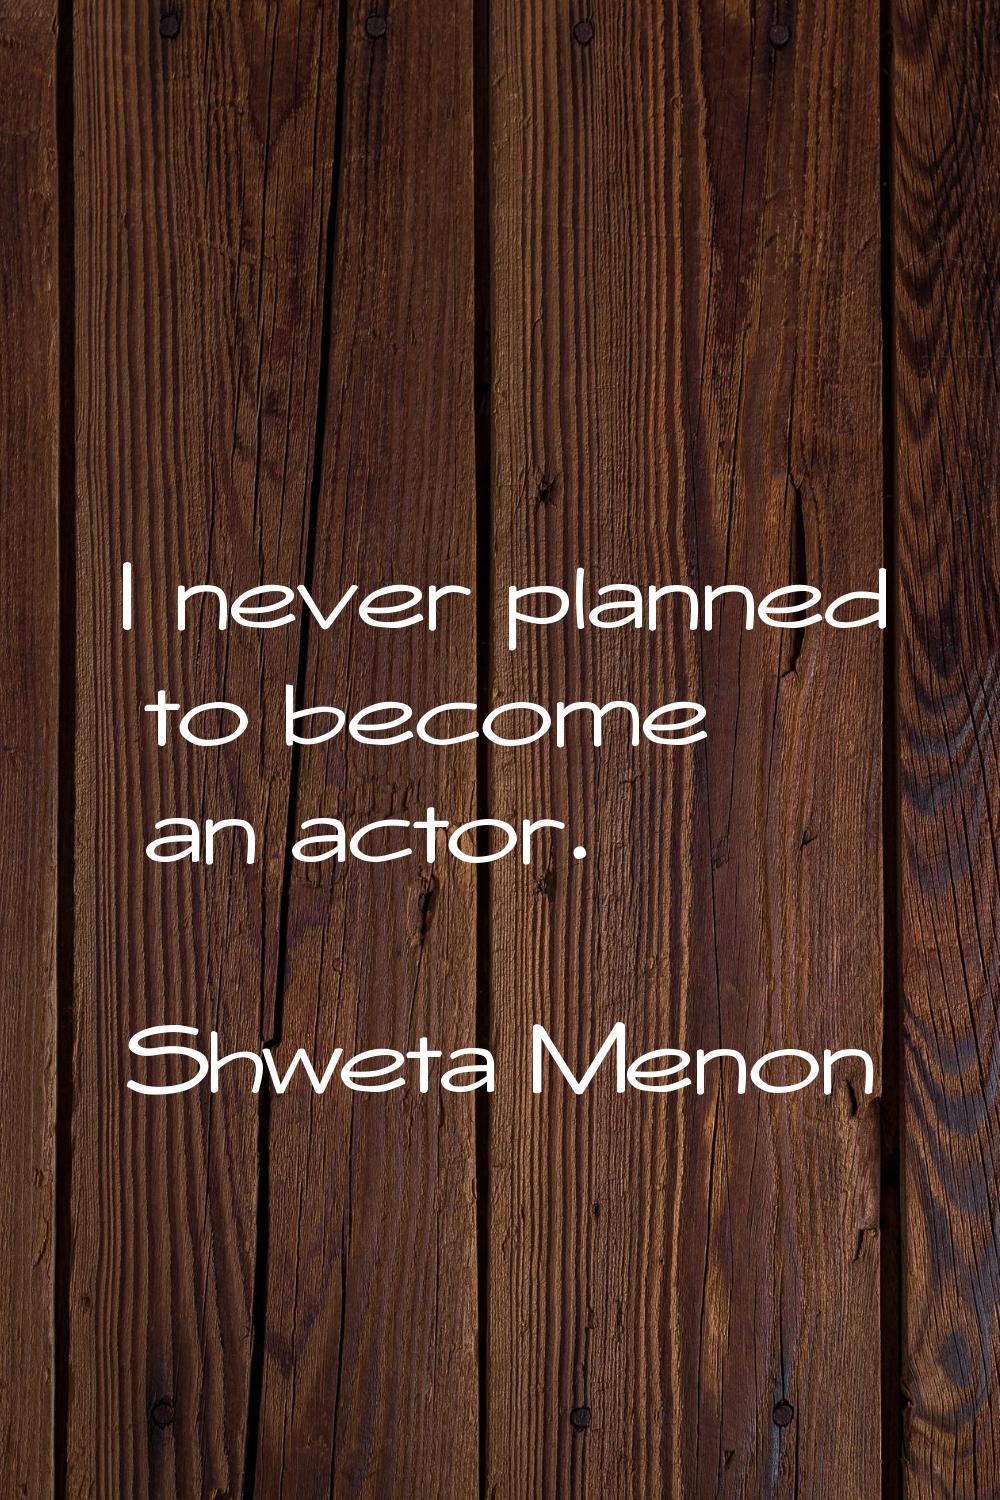 I never planned to become an actor.